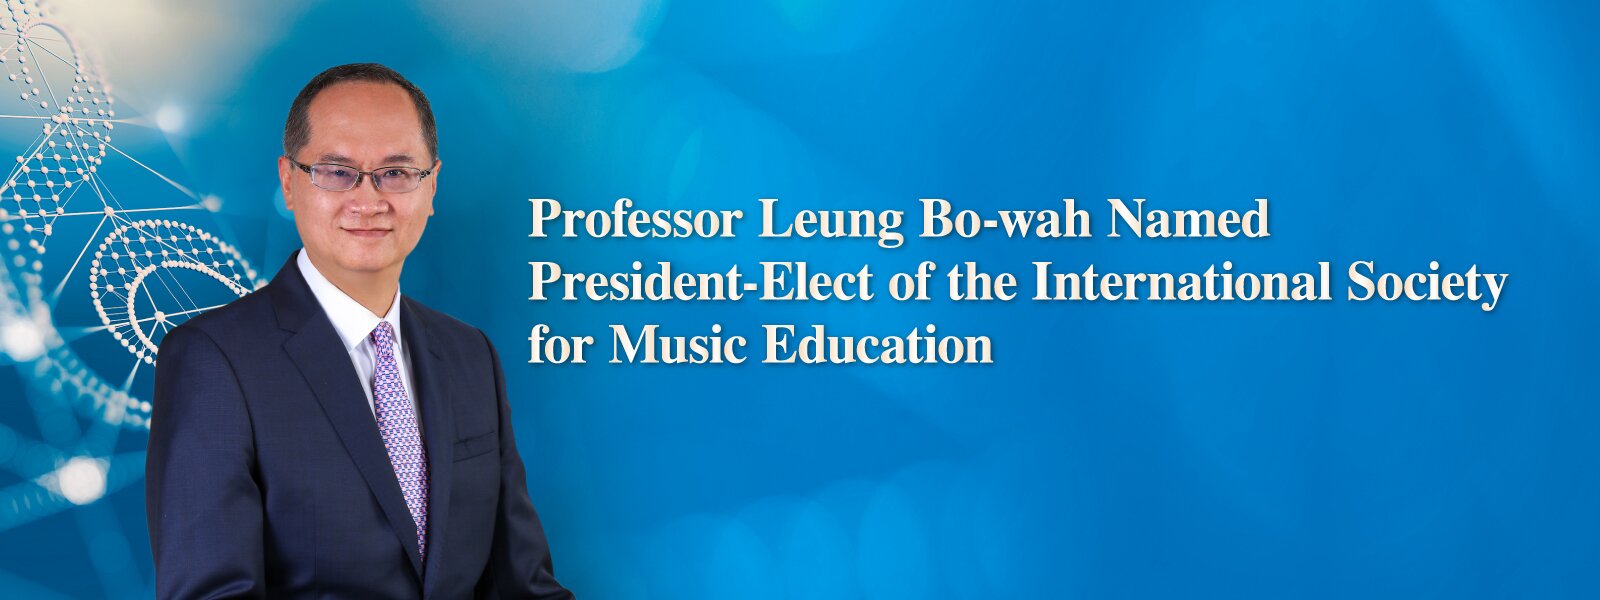 Professor Leung Bo-wah Named President-Elect of the International Society for Music Education